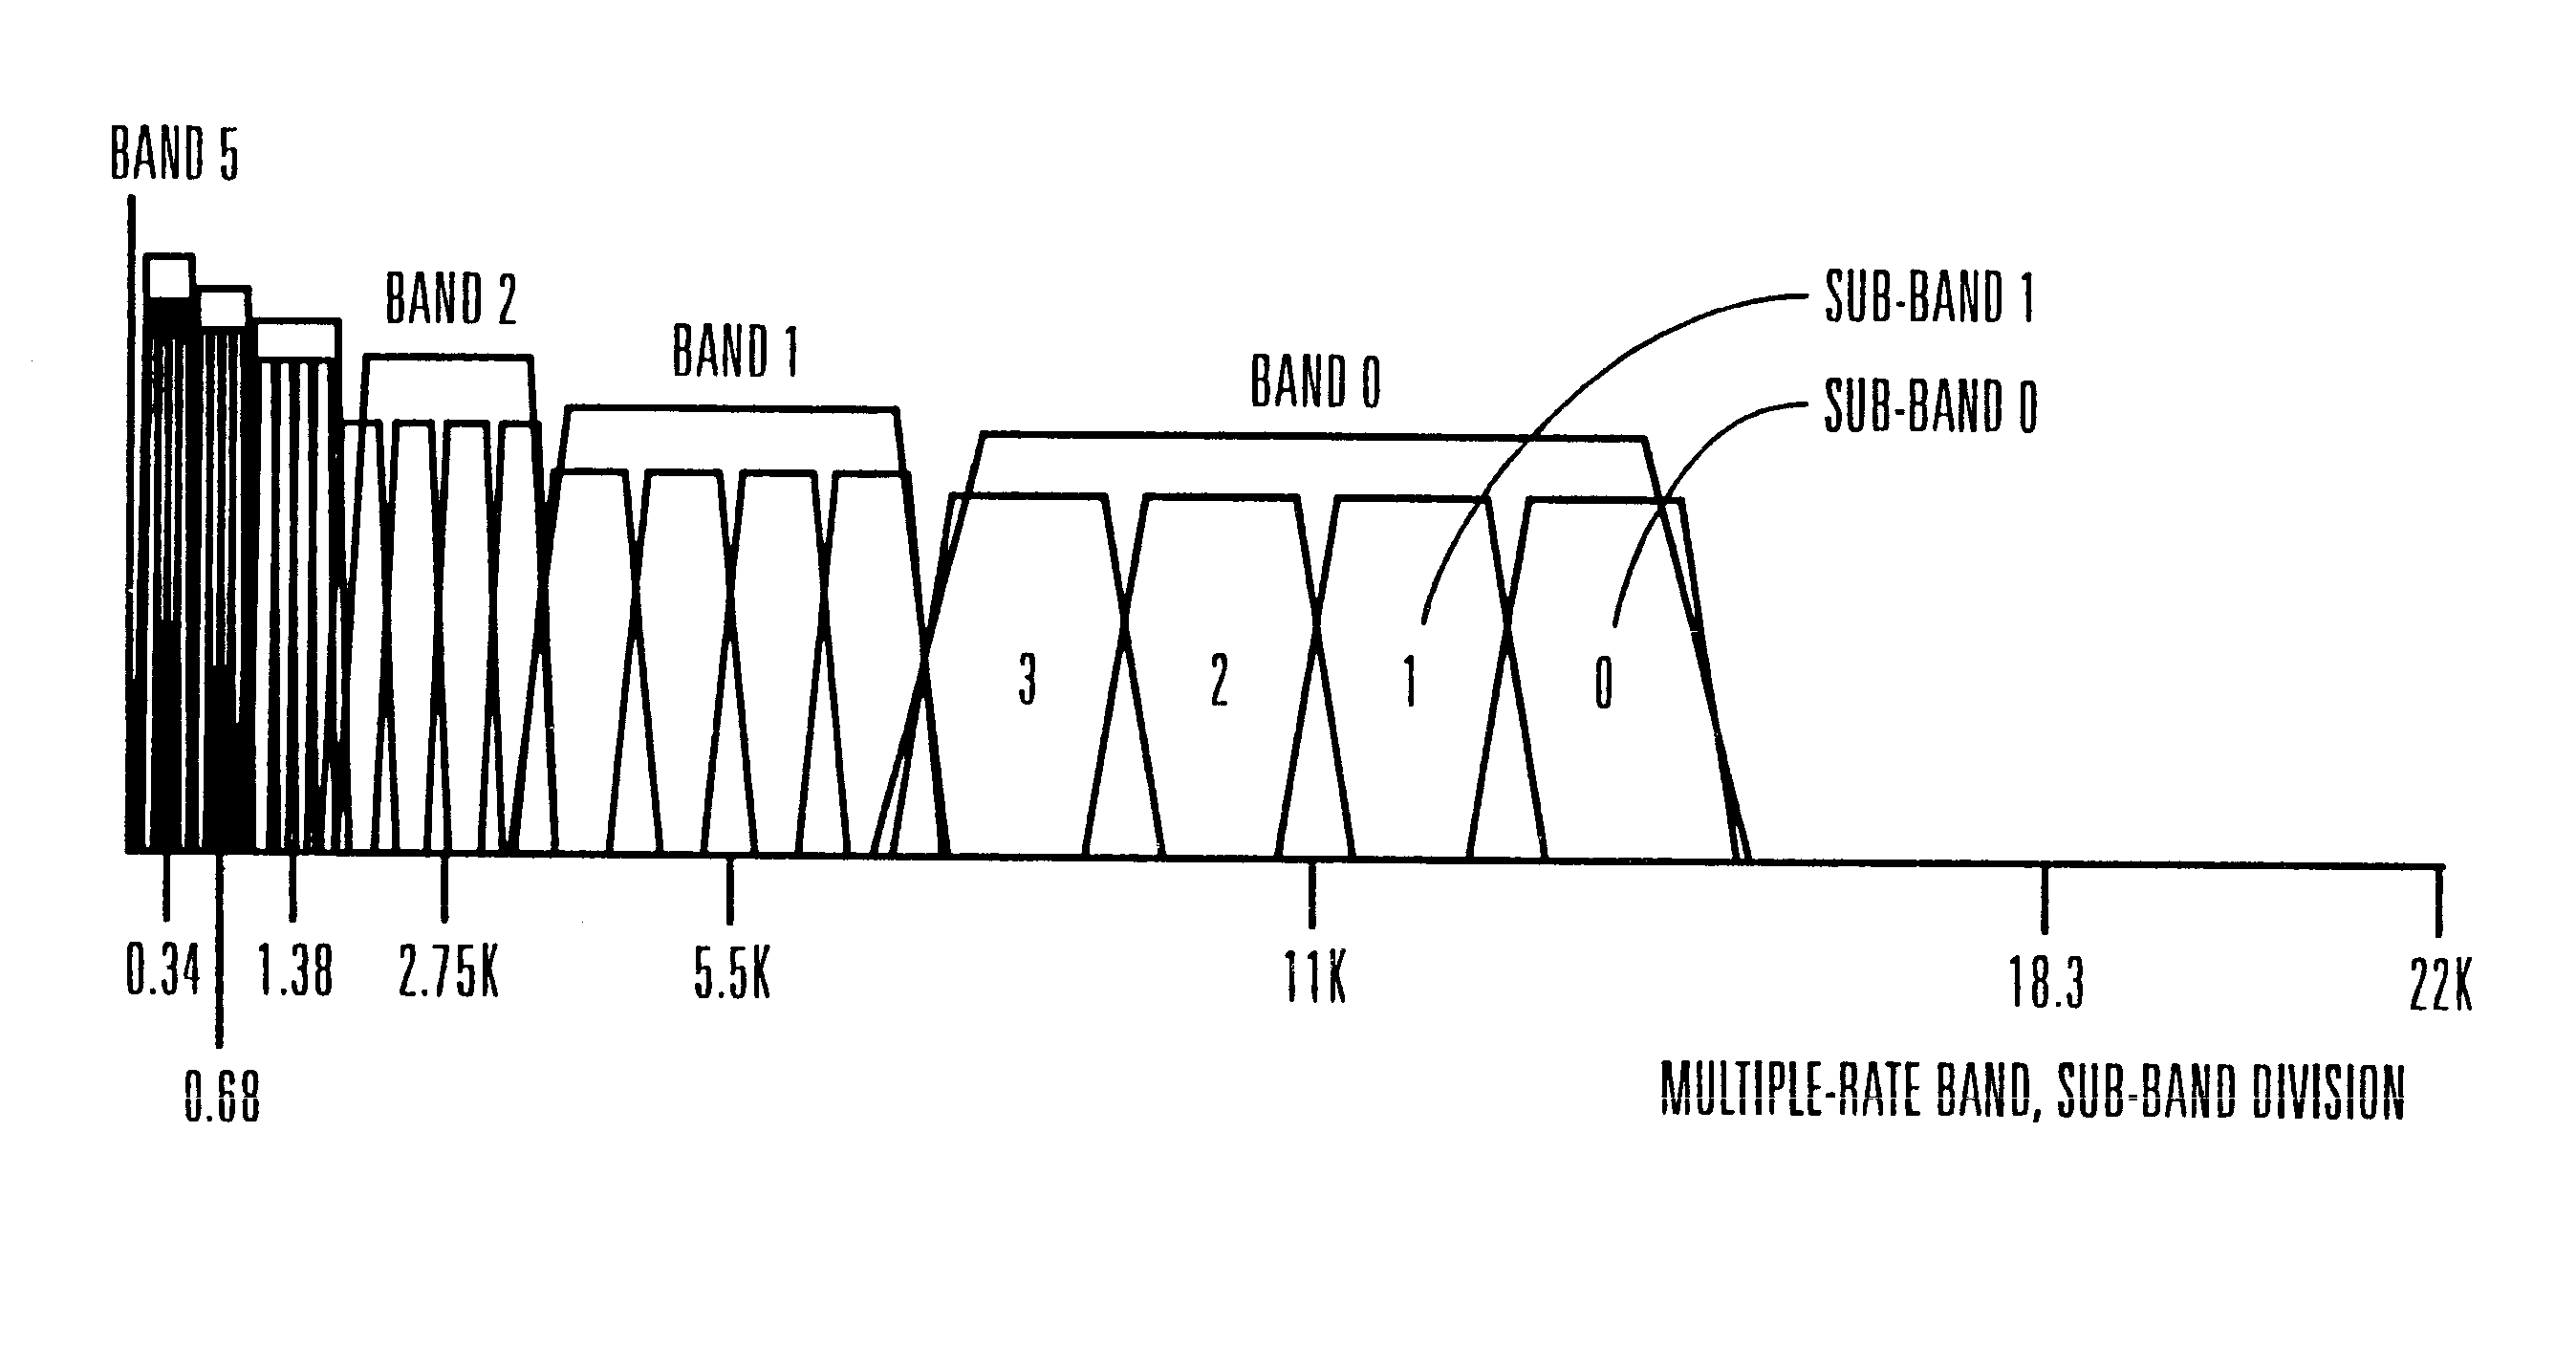 Waveform signal compression and expansion along time axis having different sampling rates for different main-frequency bands